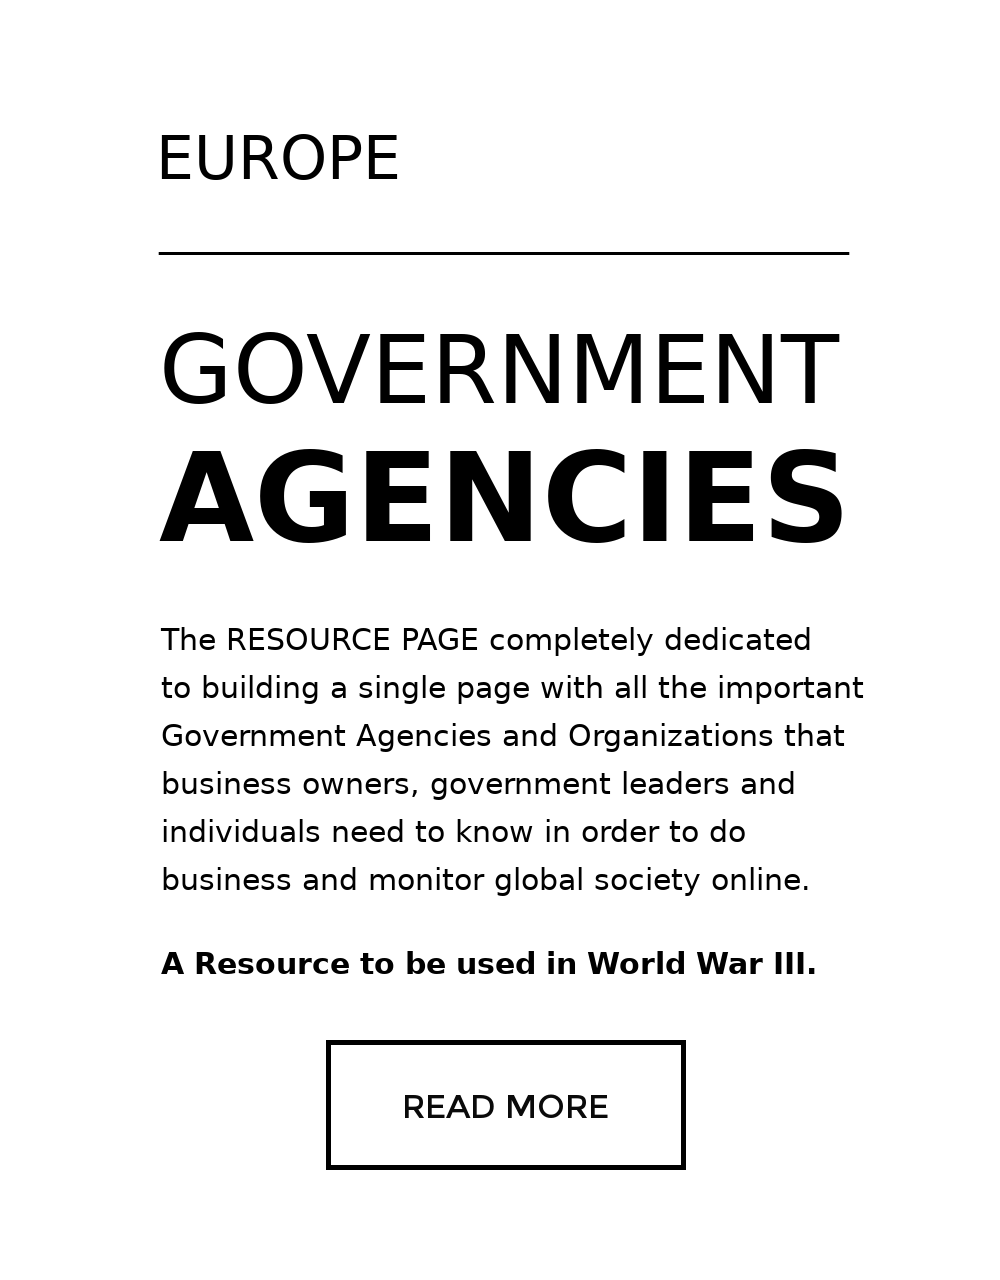 governments-worldwide-Europe-card-v2